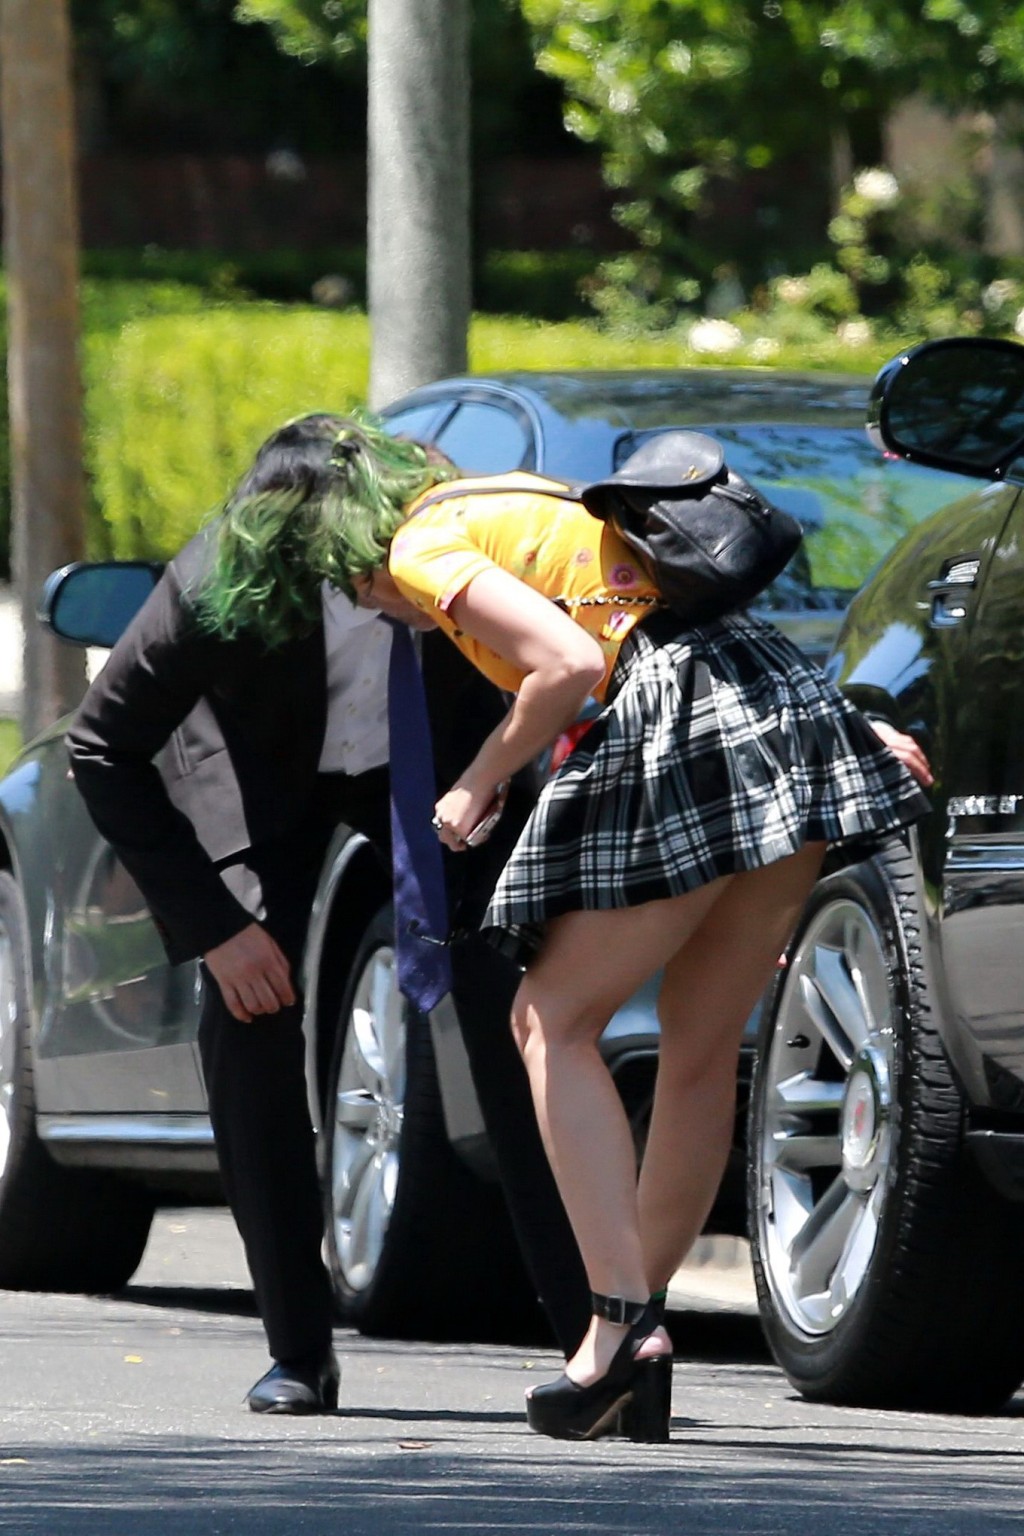 Katy perry upskirt fuori in beverly hills
 #75193955